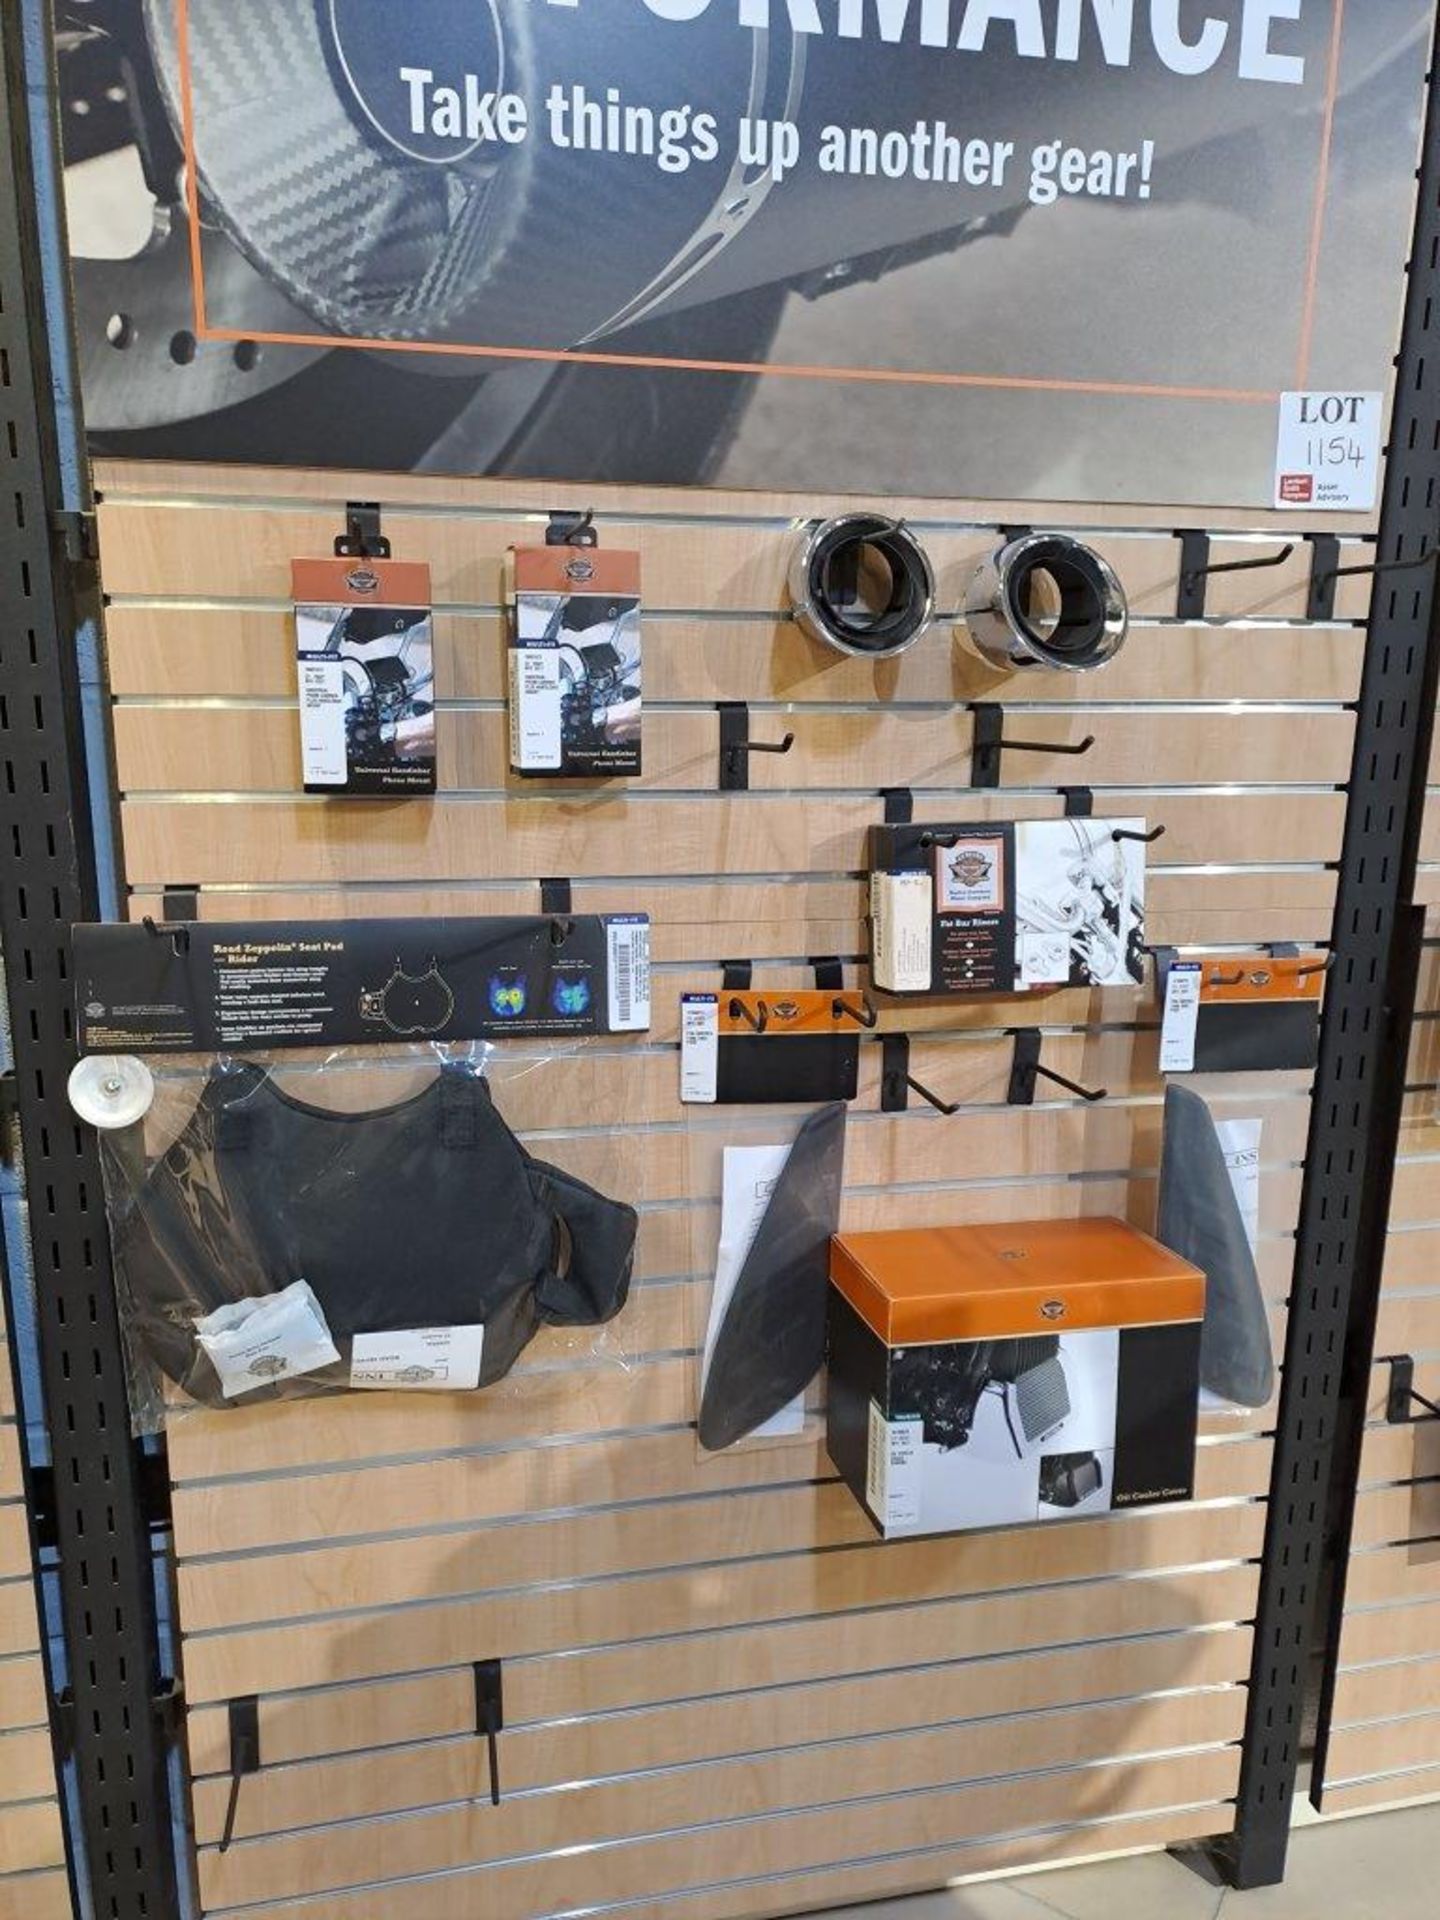 Quantity of Harley Davidson Parts & Accessories, to Retail Display board as Pictured